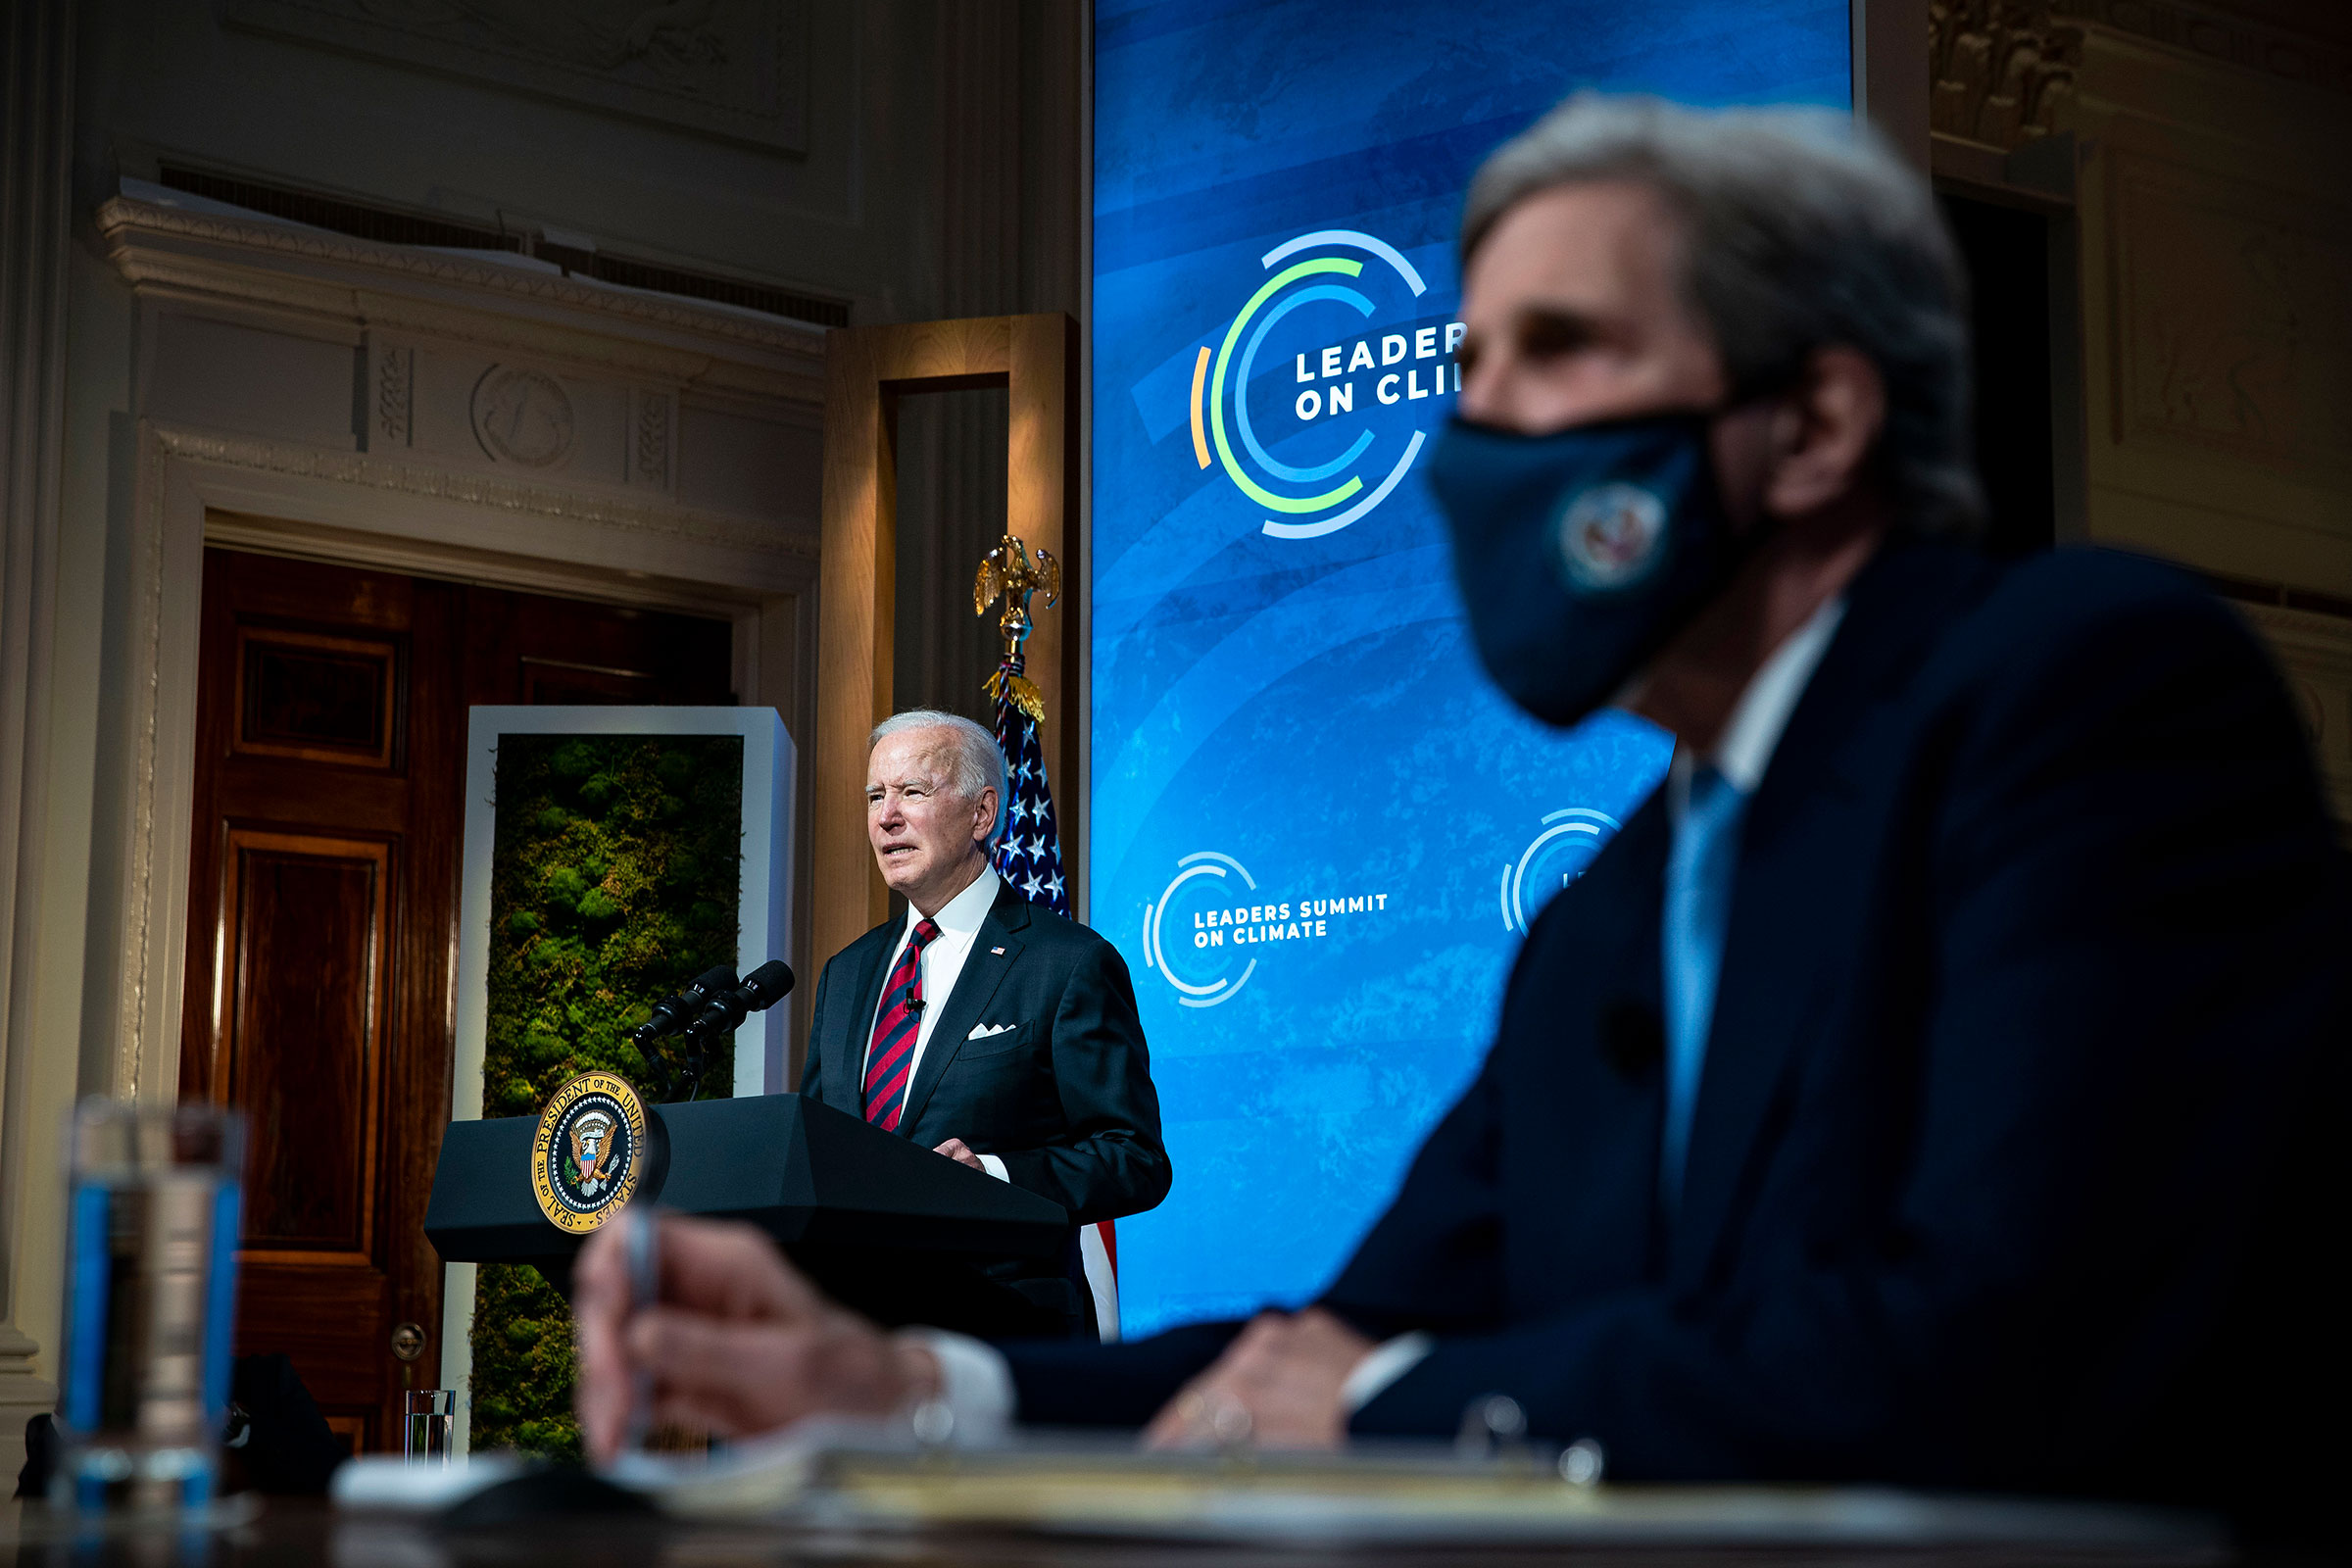 President Joe Biden delivers remarks as John Kerry listens during a virtual Leaders Summit on Climate with 40 world leaders at the White House on April 22, 2021.